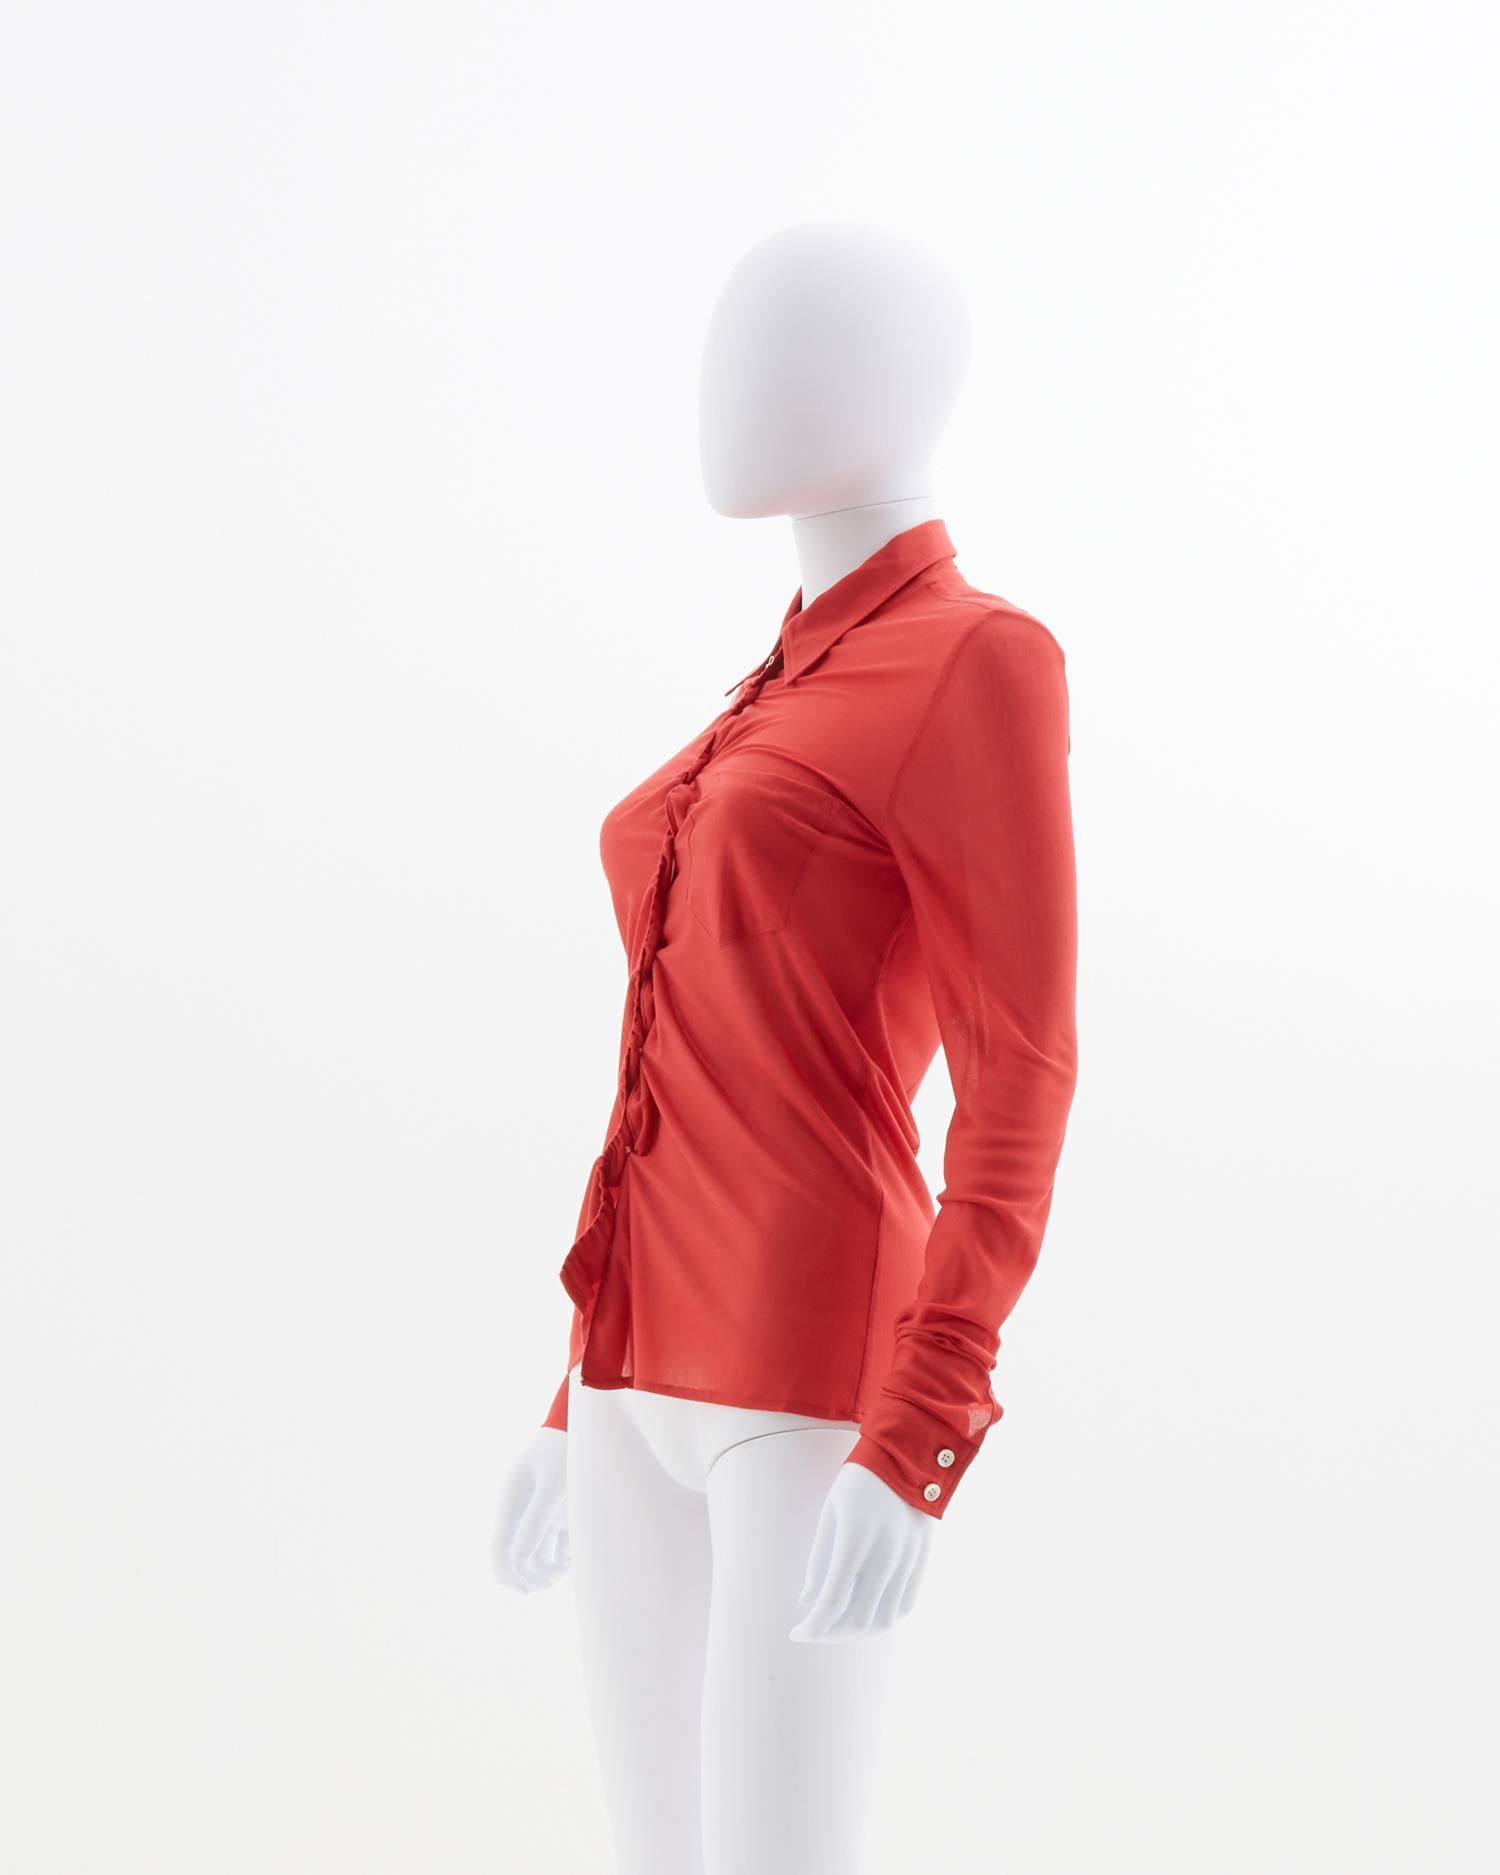 - Designed by Martin Margiela
- Sold by Skof.Archive
- Red shirt 
- Plastic coulisse detail referenced on Look 13
- Button closure 
- Spring Summer 2001
- Made italy 

Size:
FR 38 - IT 42 - UK 10 - US 6 (EU)

Composition : 
100%